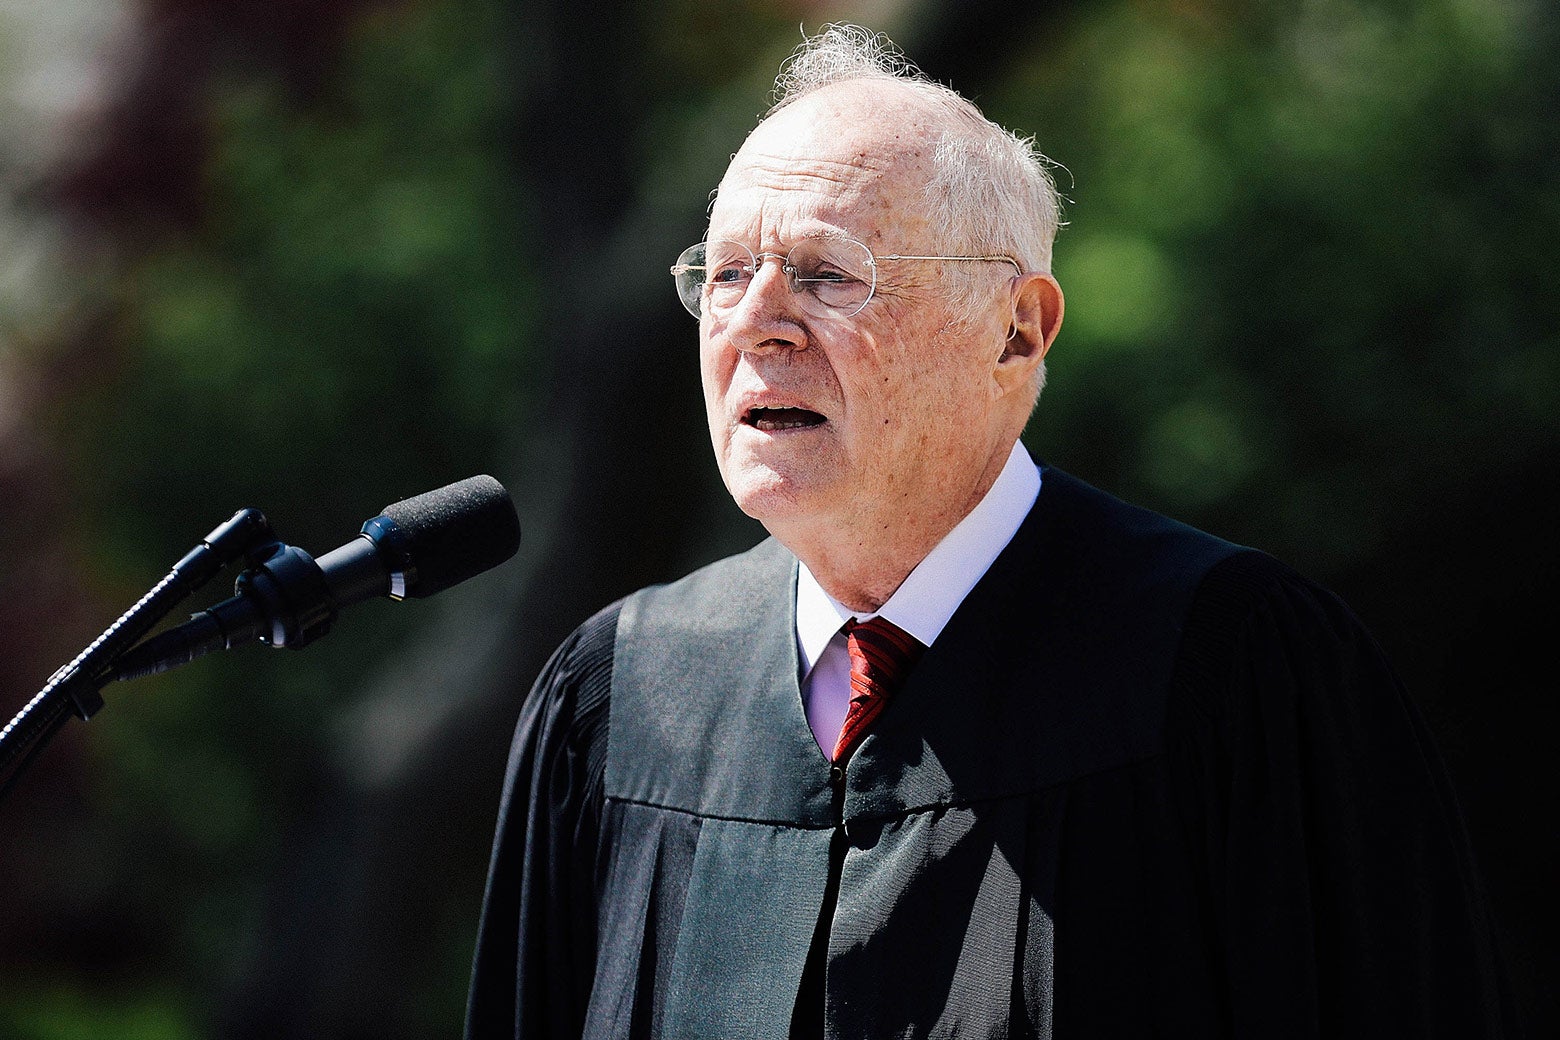 Supreme Court Associate Justice Anthony Kennedy delivers remarks before administering the judicial oath to Neil Gorsuch during a ceremony in the Rose Garden at the White House on April 10, 2017, in Washington.